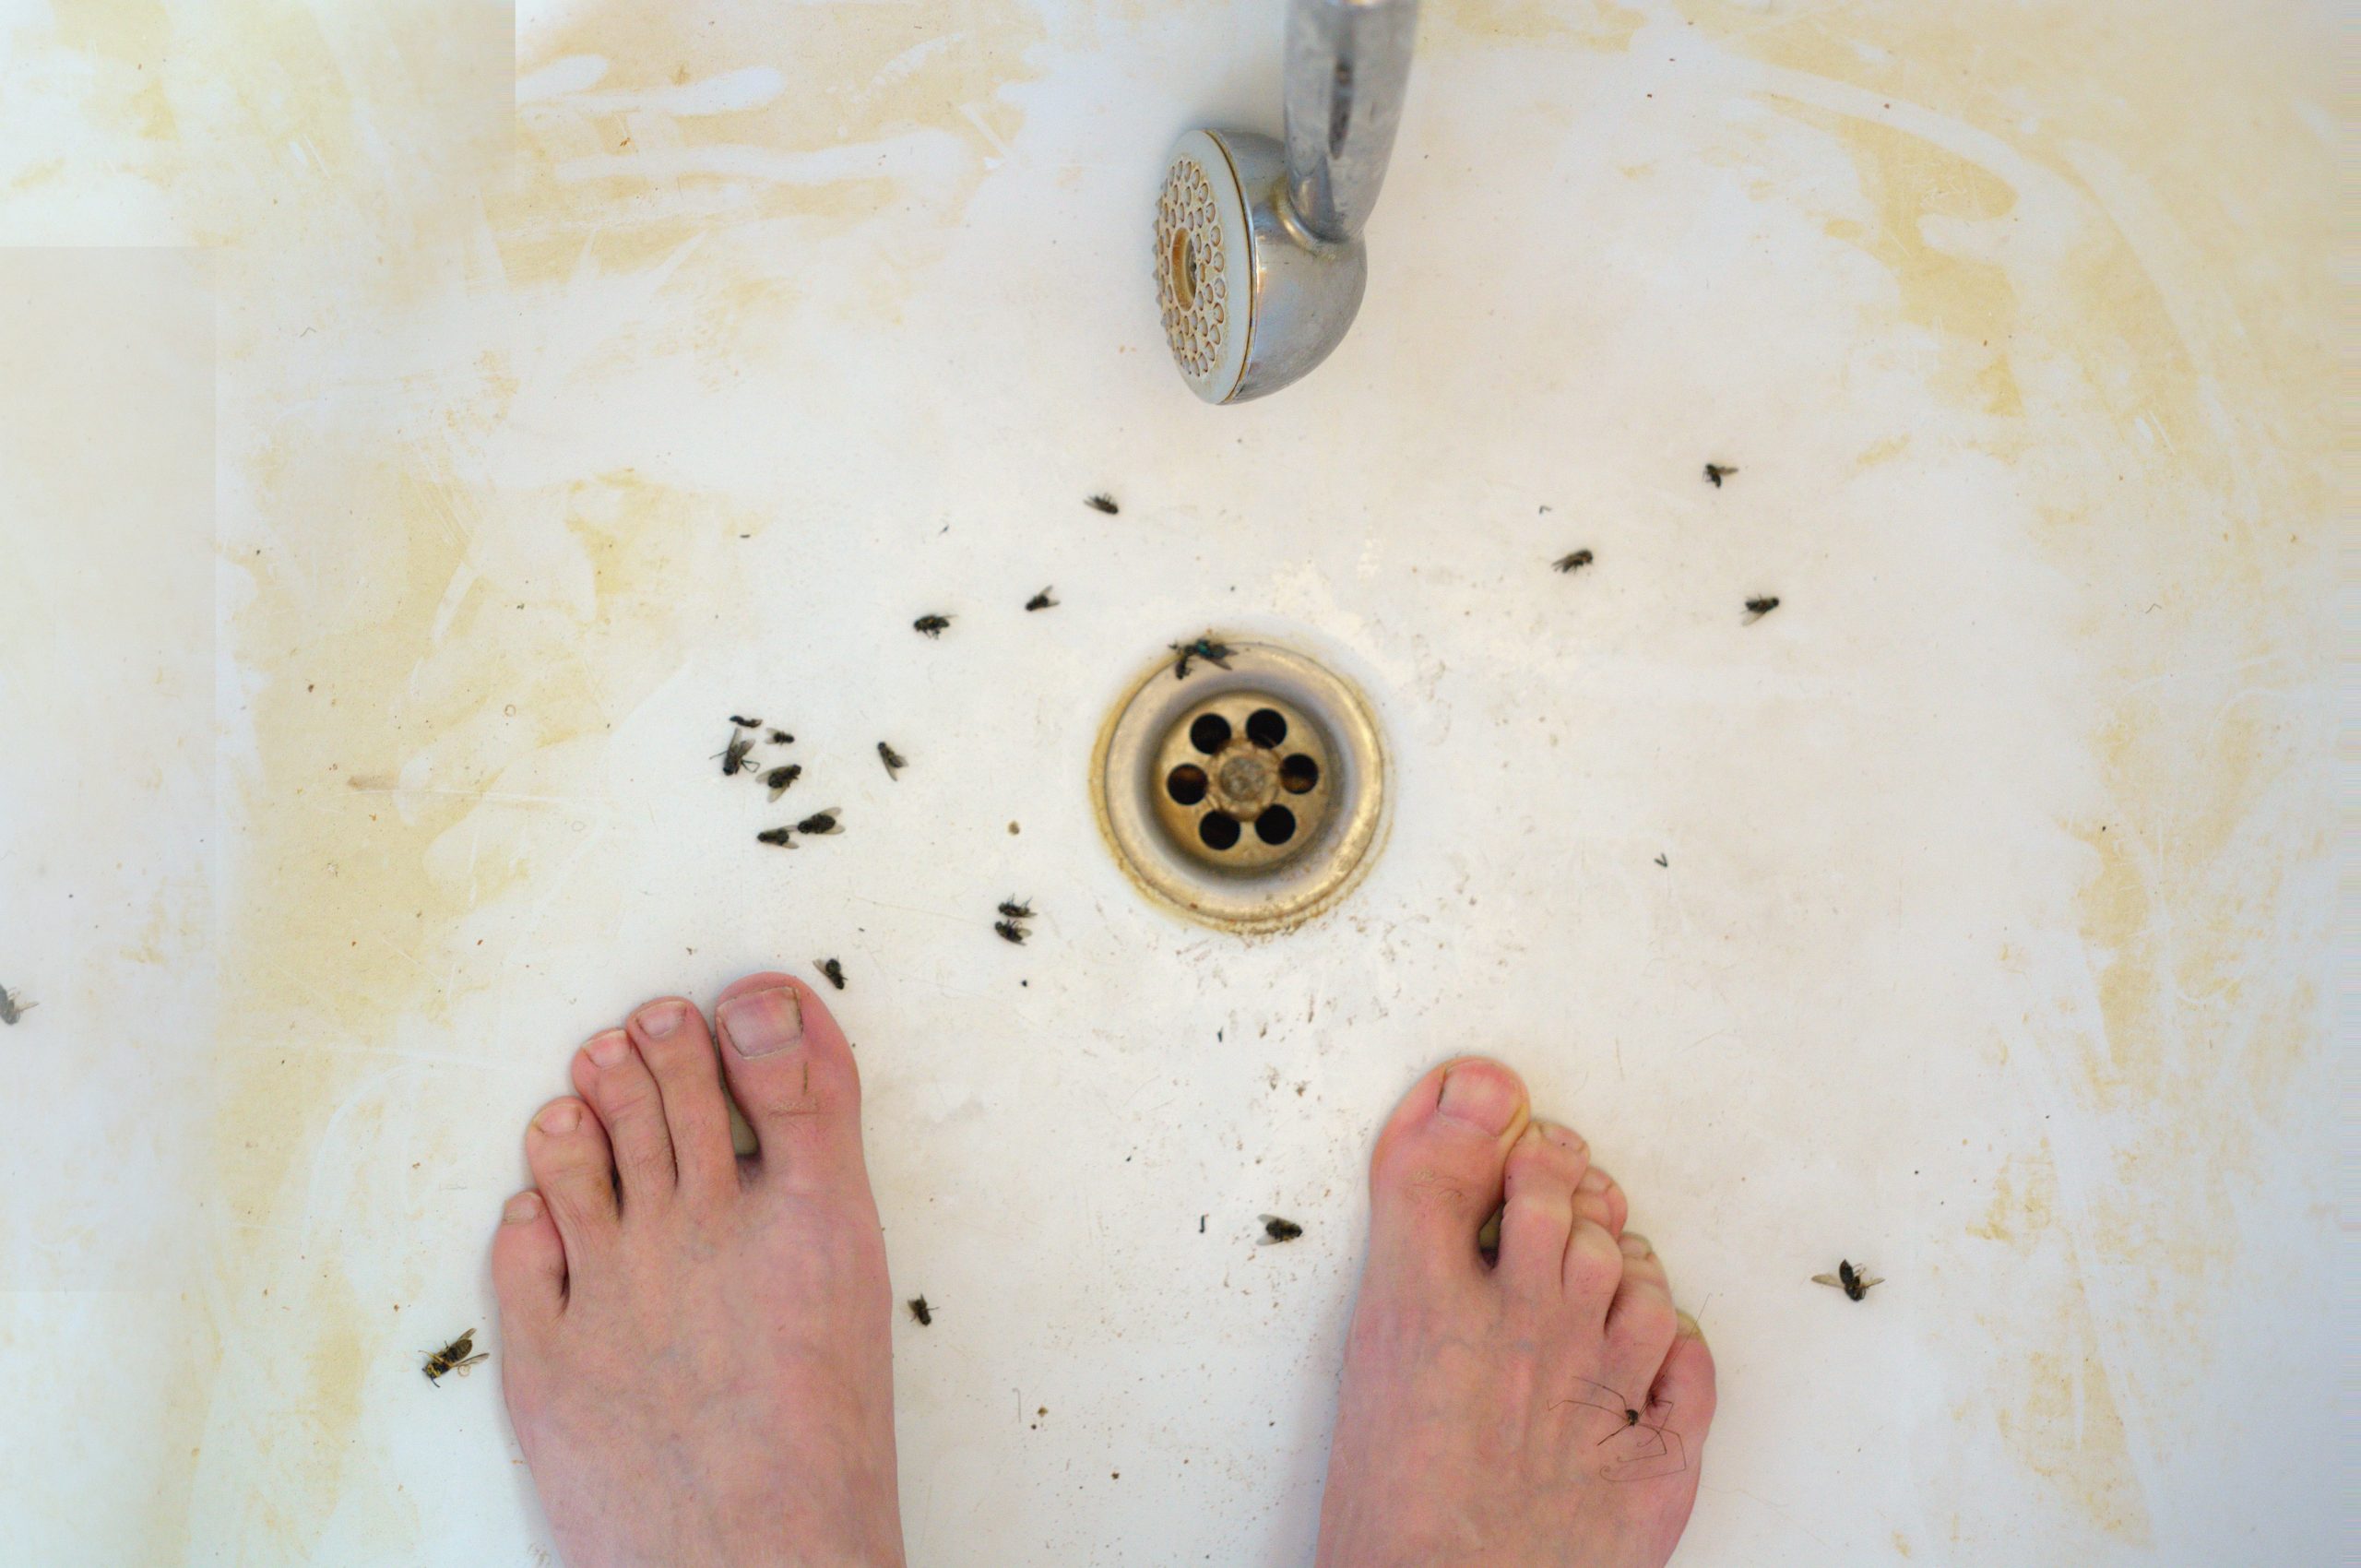 Cleaning 101: Getting Rid of Drain Flies